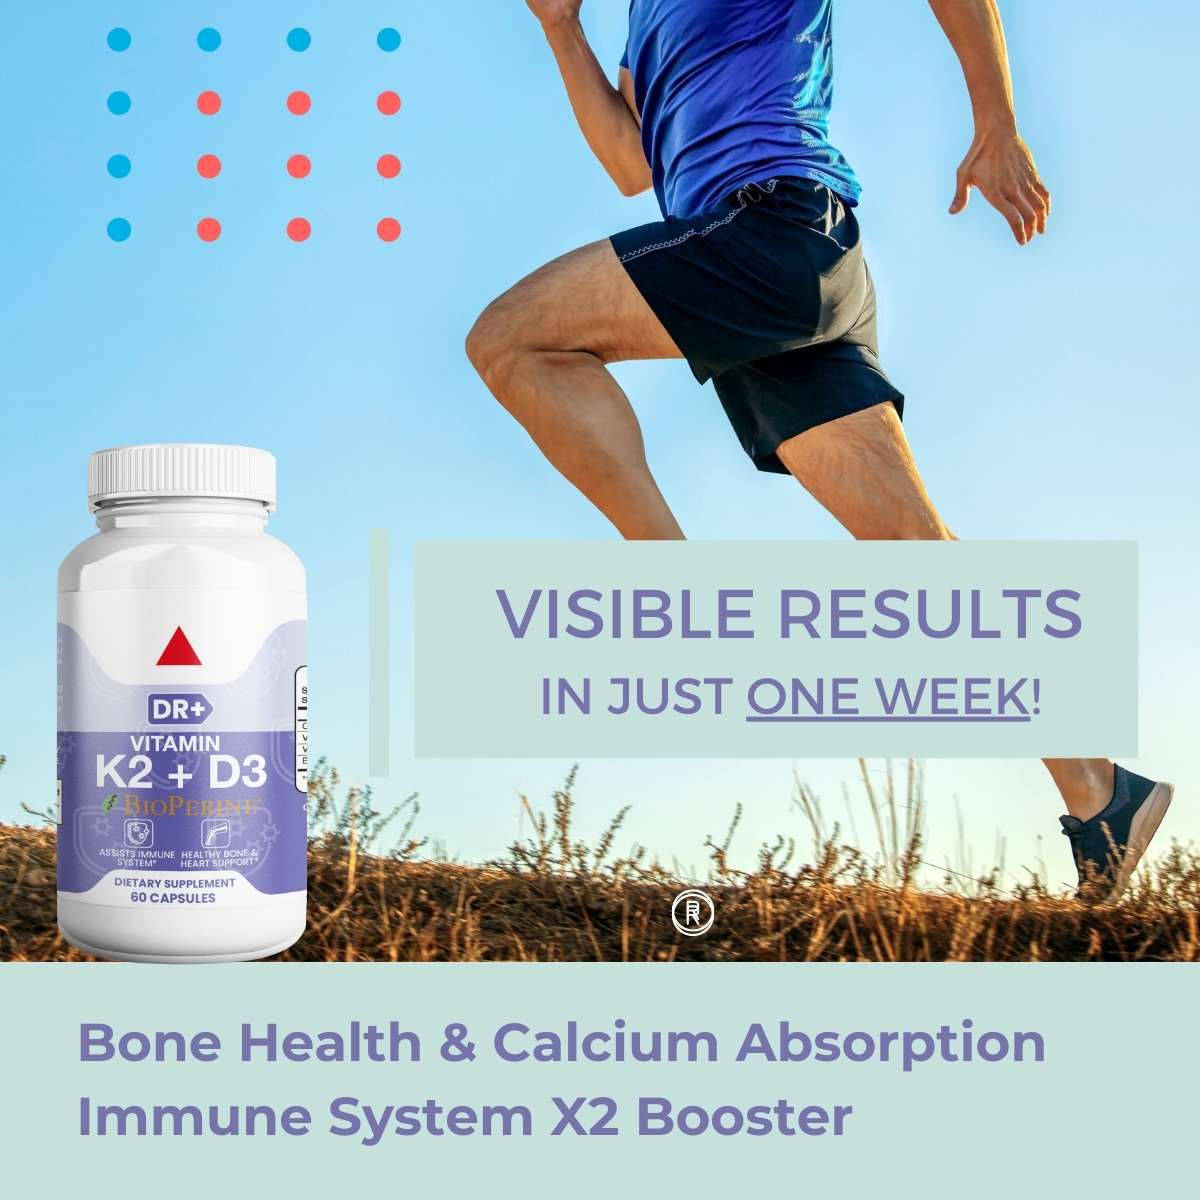 Vitamin K2 (MK7) with D3 5000 IU Supplement for Immune System - Herblif Nutrition USA